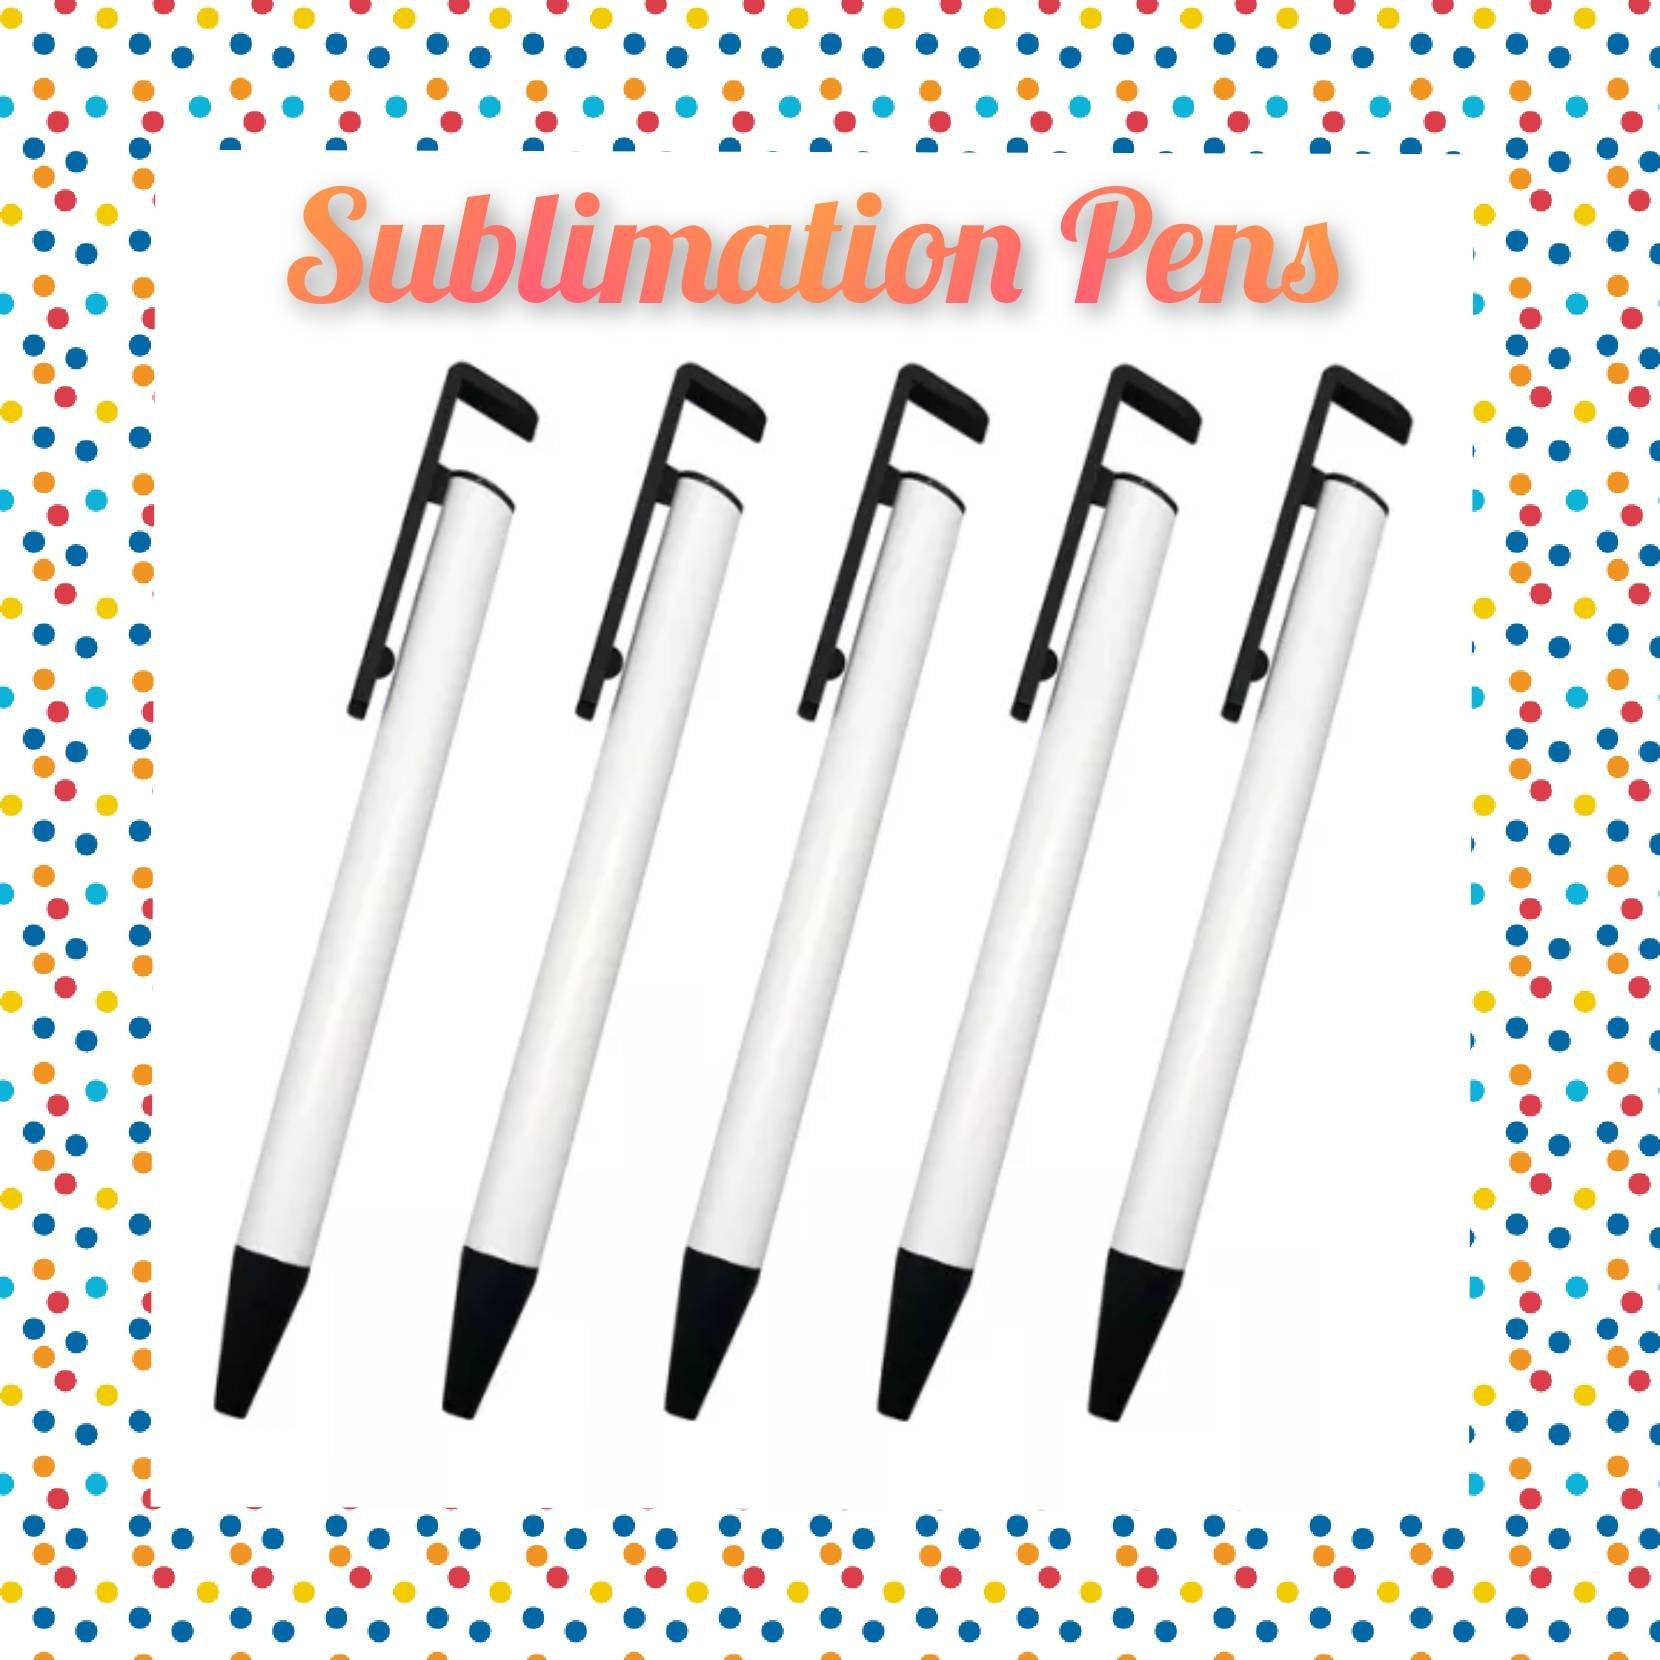 Sublimation Pens Blanks with Shrink Wrap (5 Pack or 10 Pack)